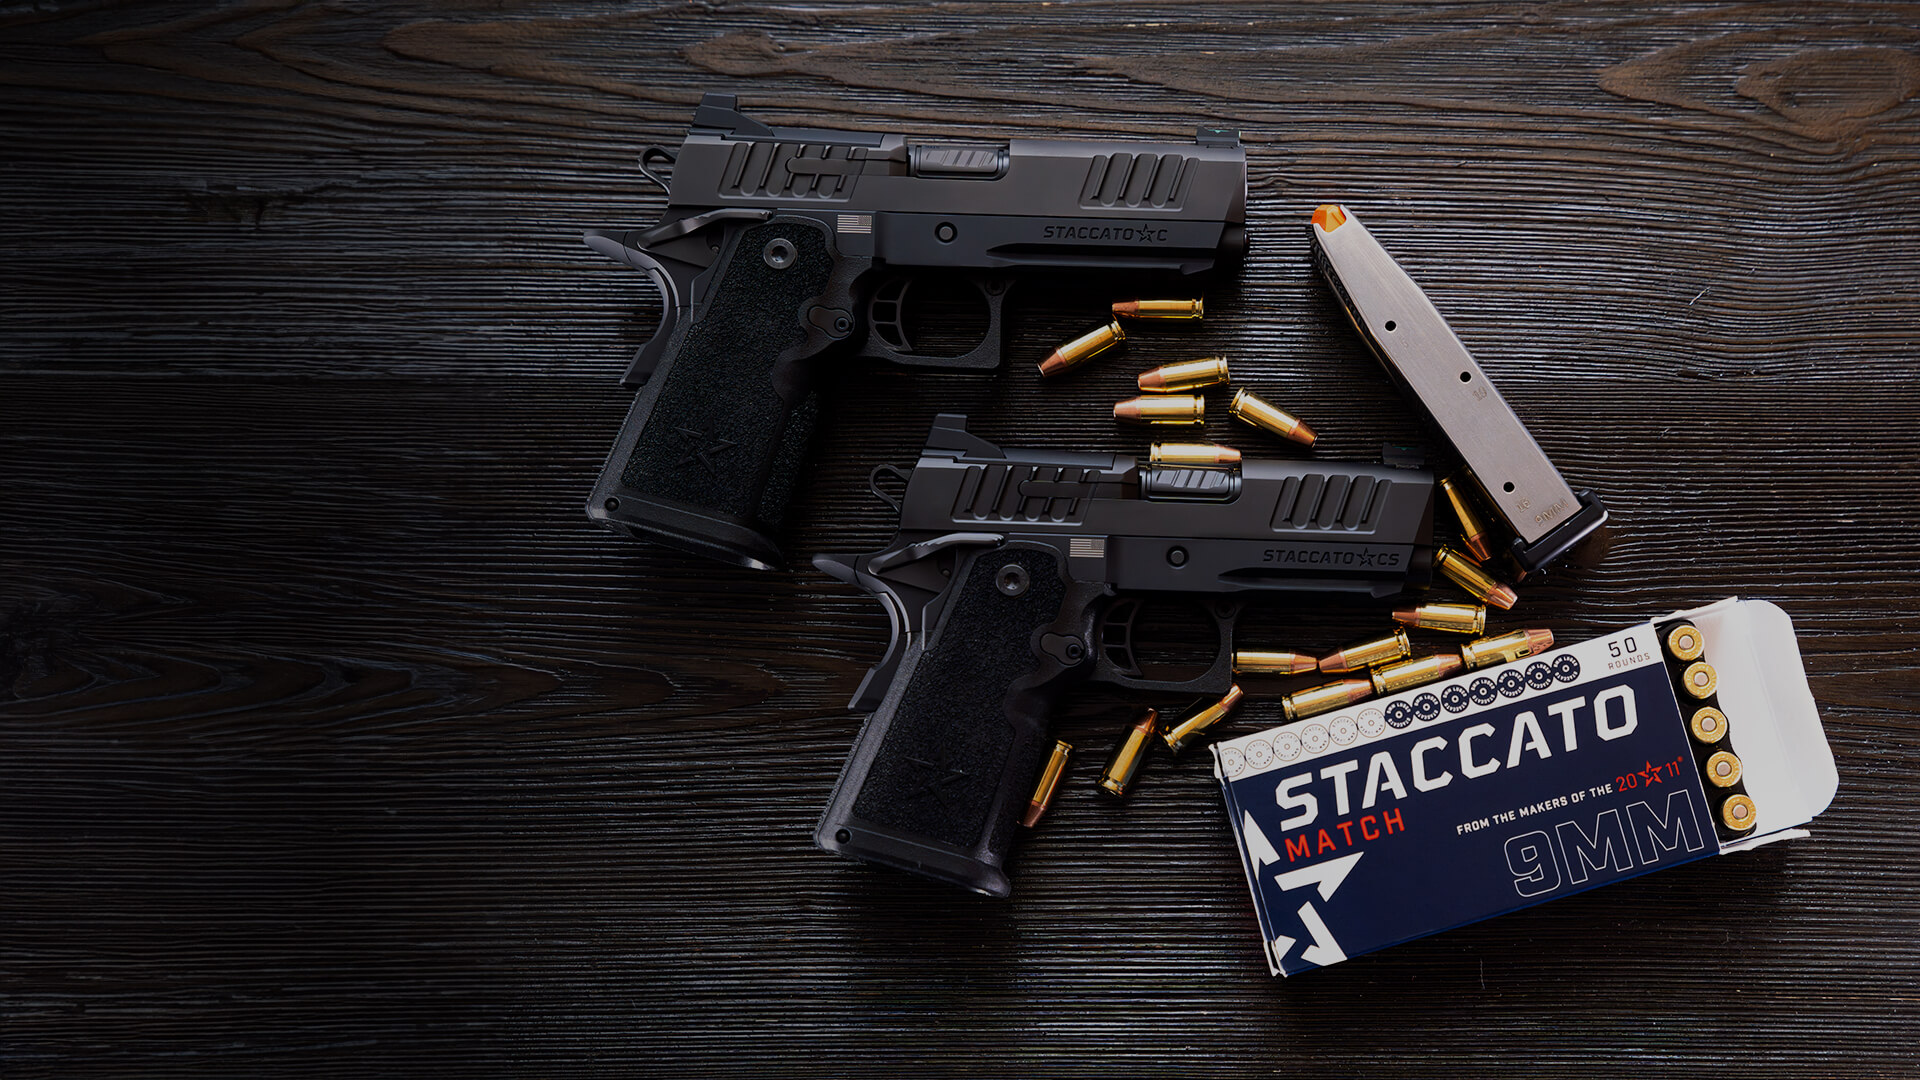 & - For Staccato Pistols, Heroes. Accessories. 2011 2011 Staccato Handguns, Built